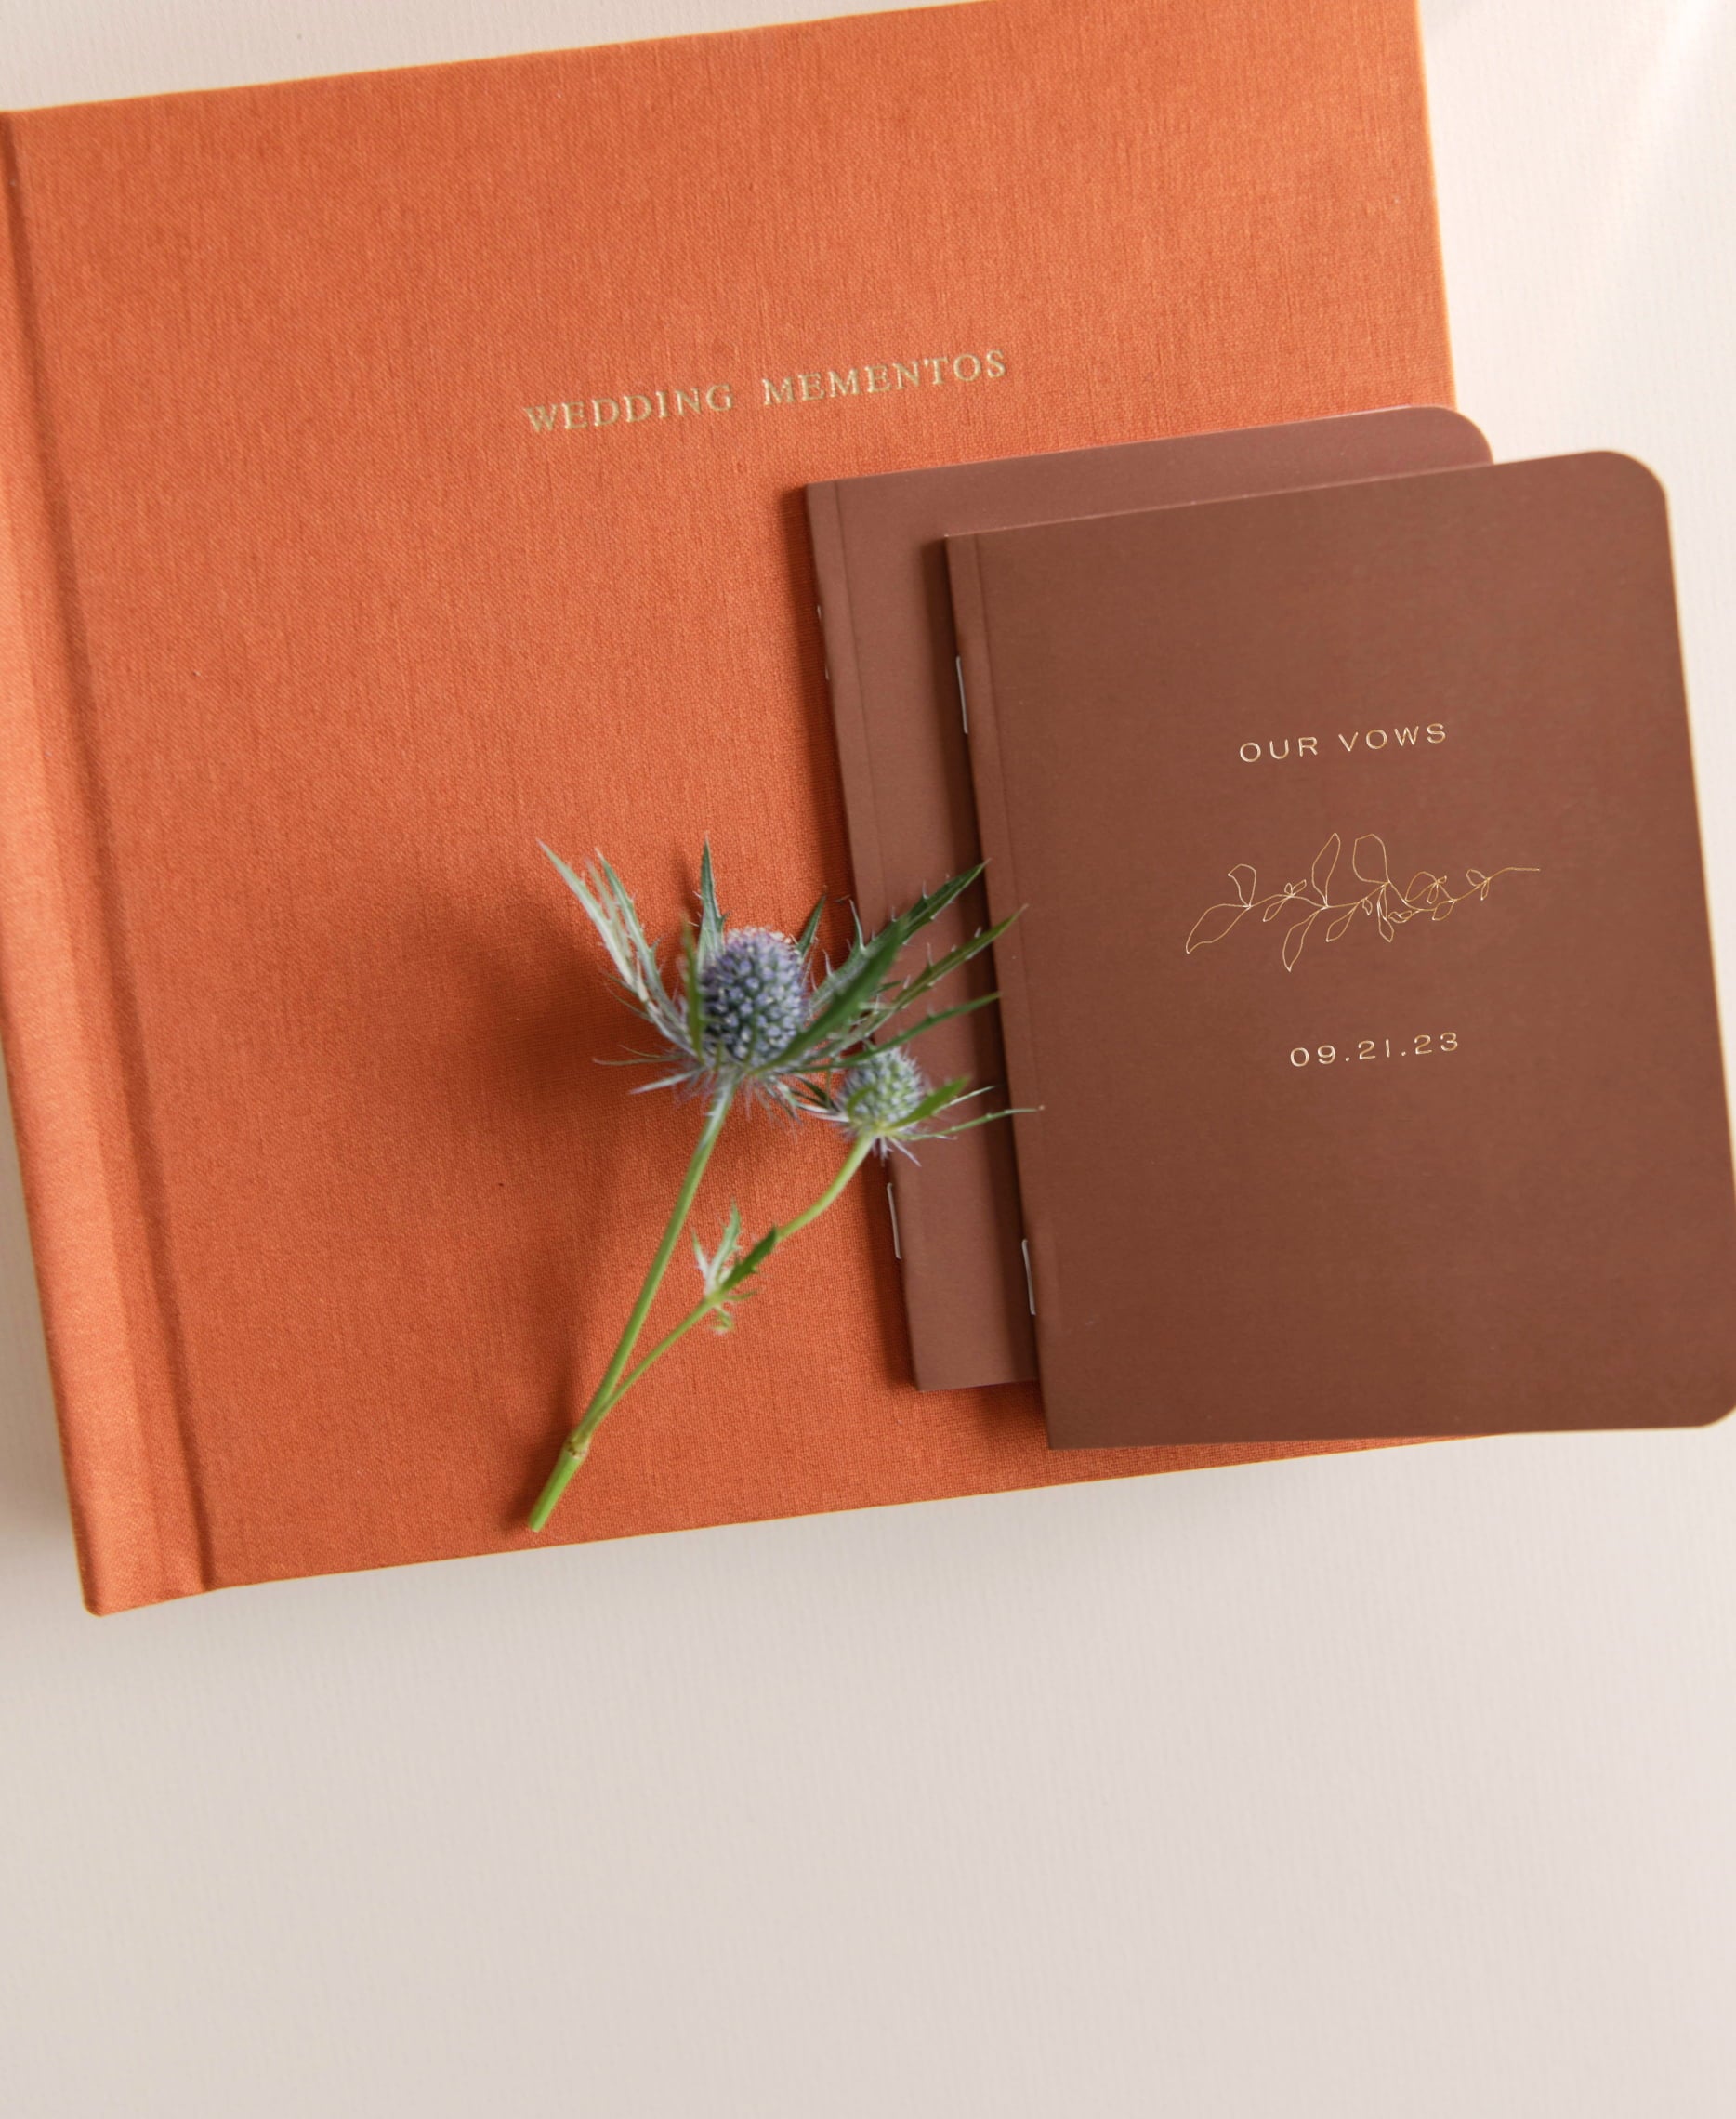 Closed Vow Book showcase the Our Vows cover stacked on top of terracotta Wedding Layflat Album